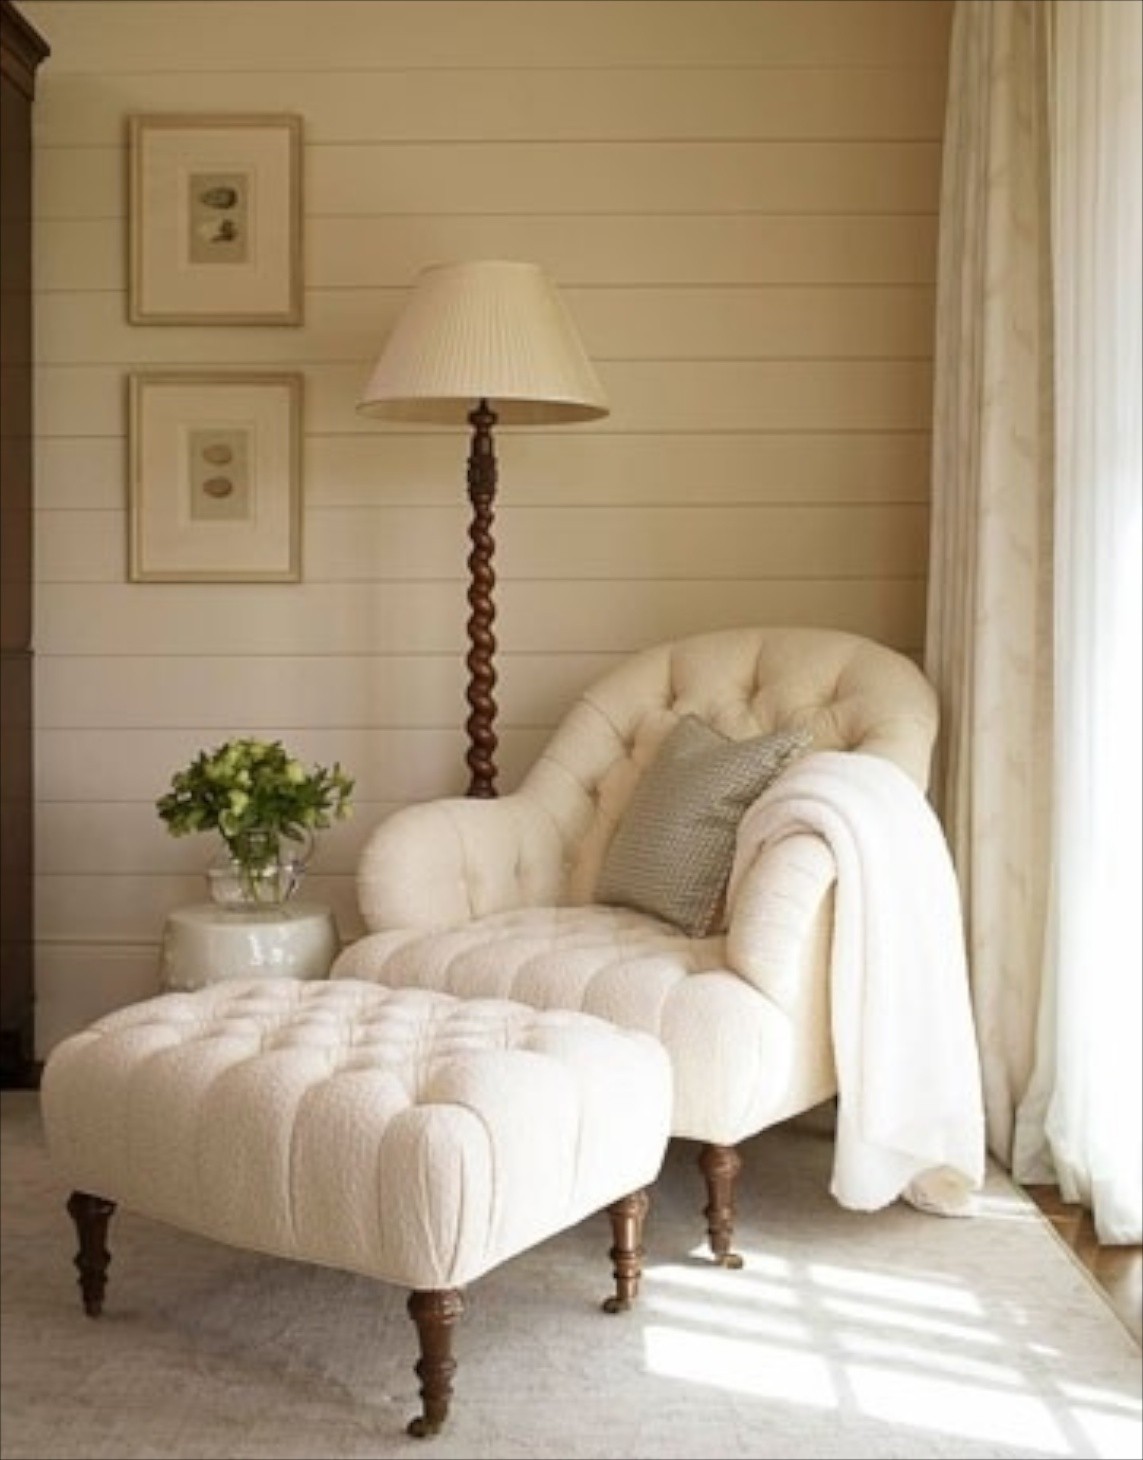 Accessorizing Ideas | Bedroom decor cozy, Chairs for small spaces, Home